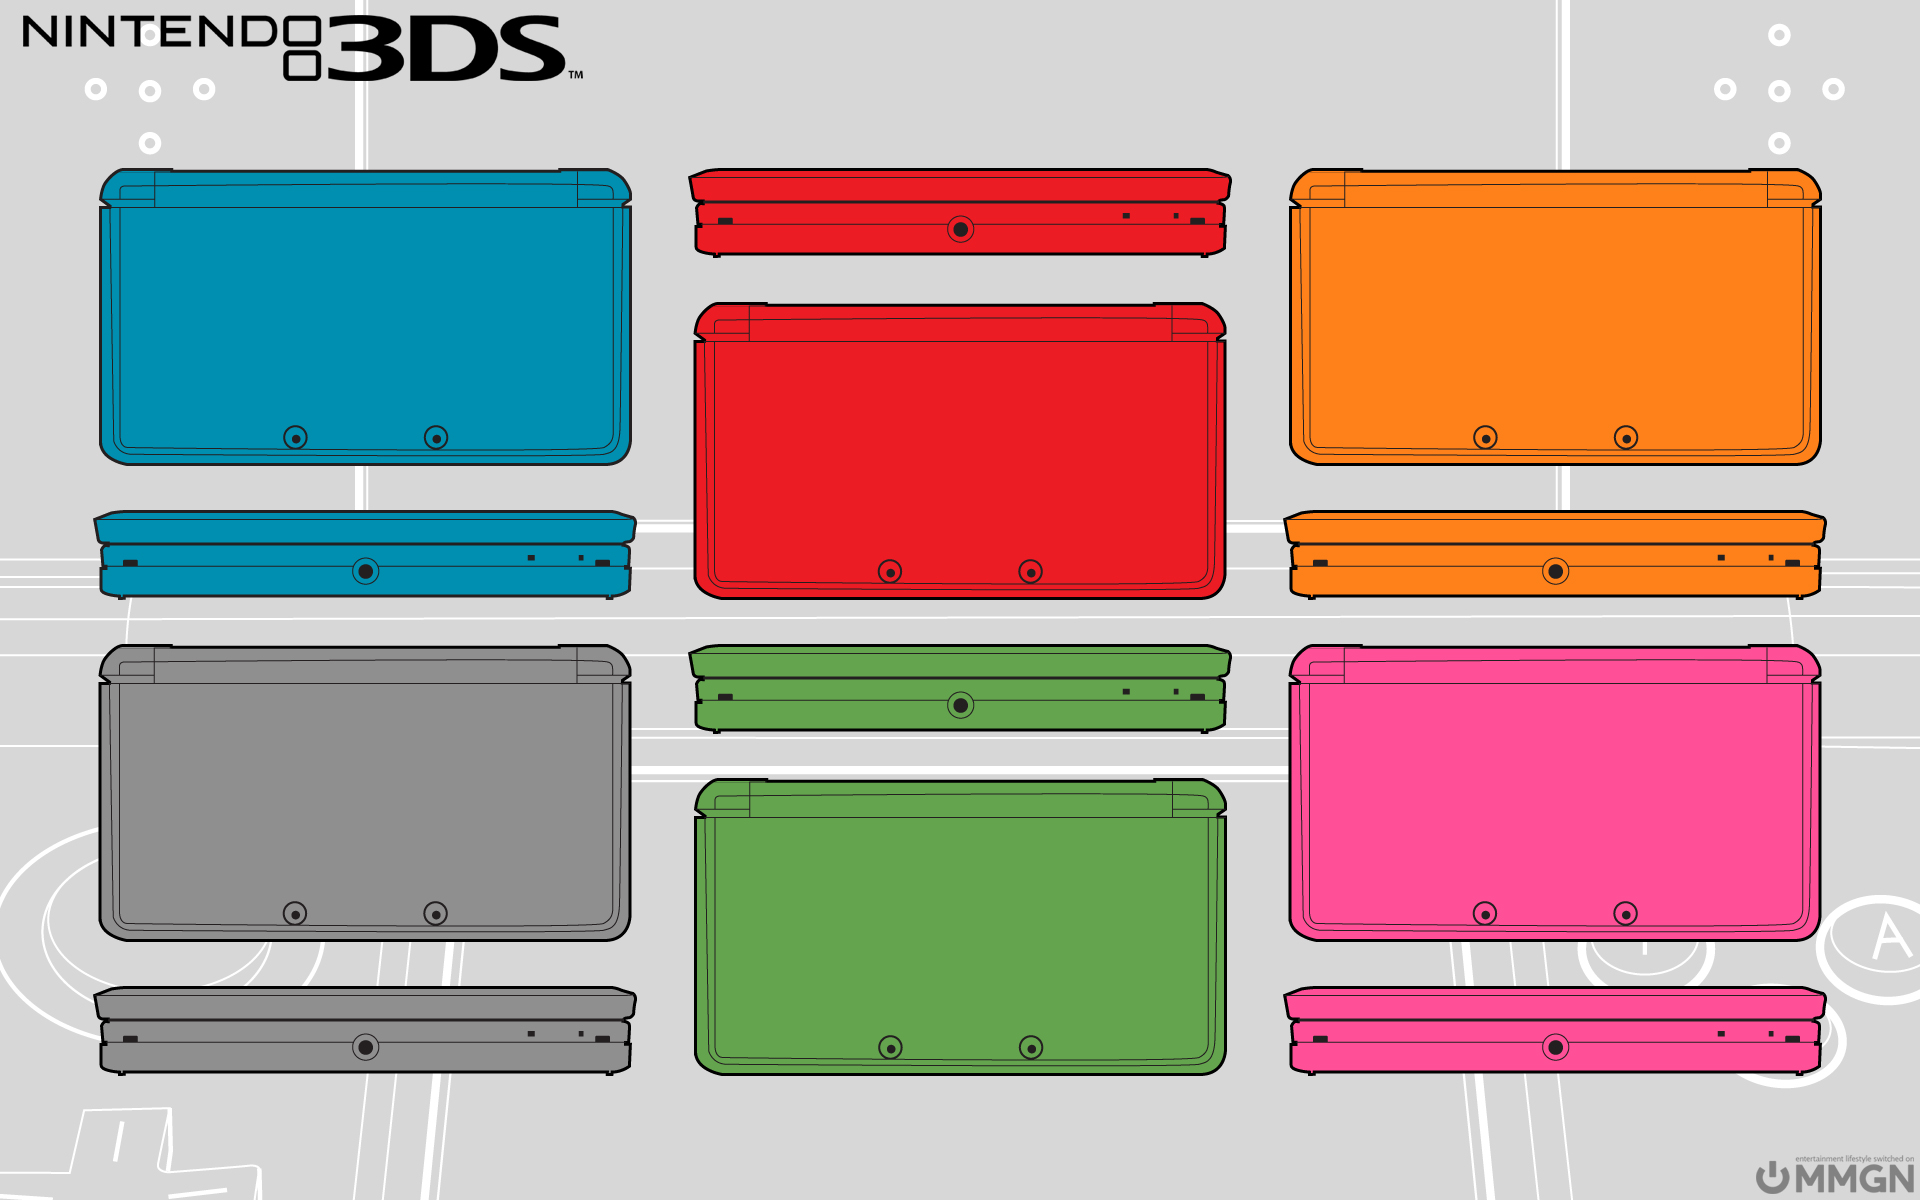 Prepare For The 3ds With An Awesome New Wallpaper Your Desktop